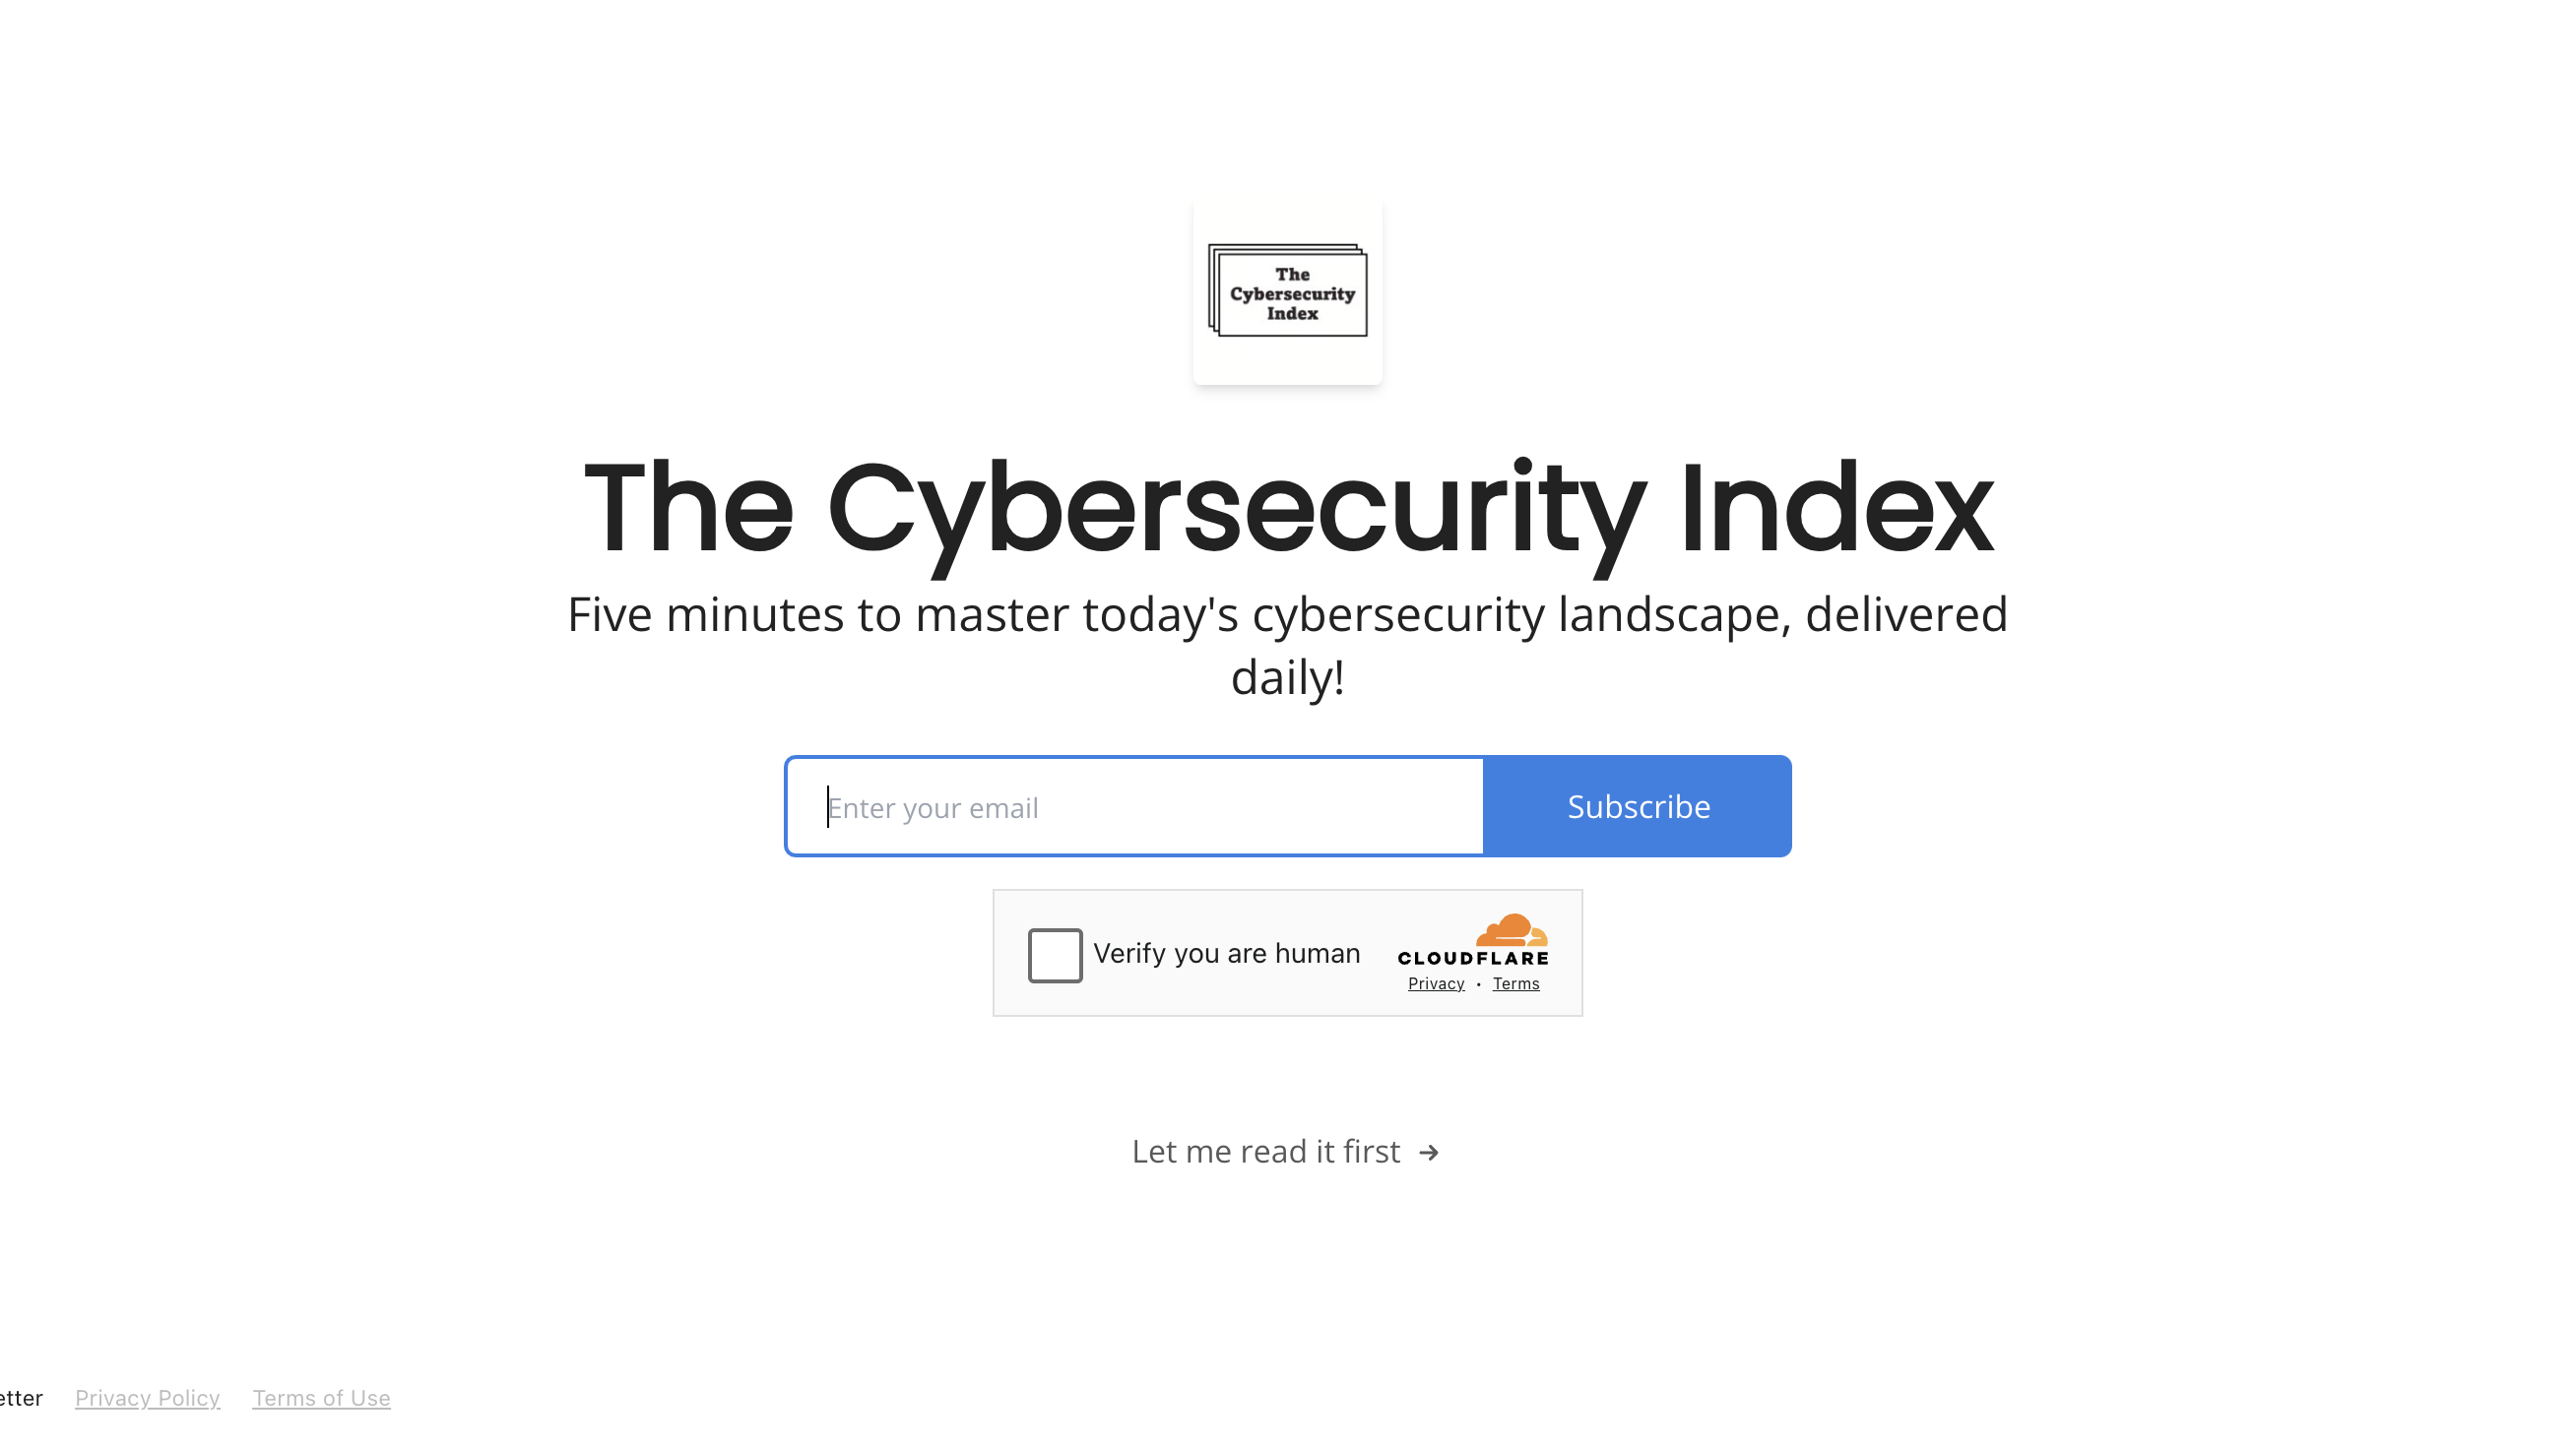 The Cybersecurity Index homepage